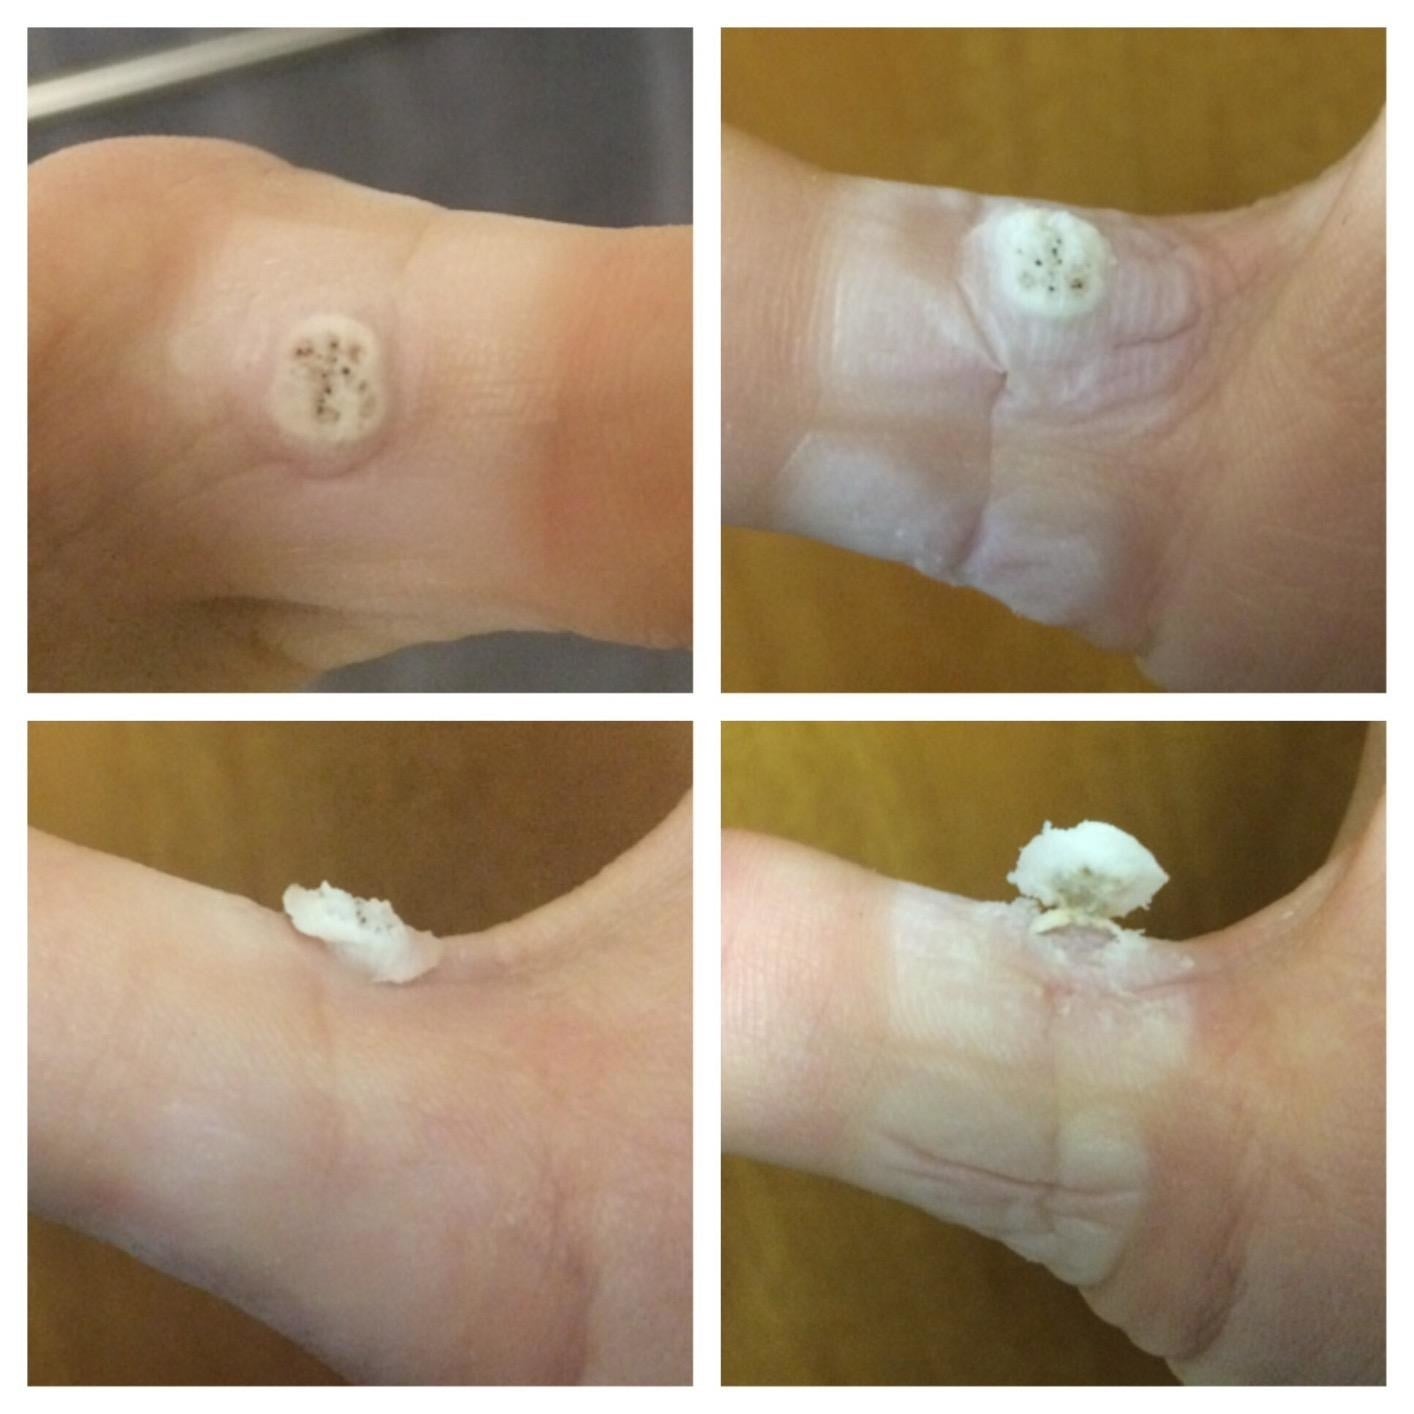 Reviewer's progression photos showing the pads removed a wart on their finger